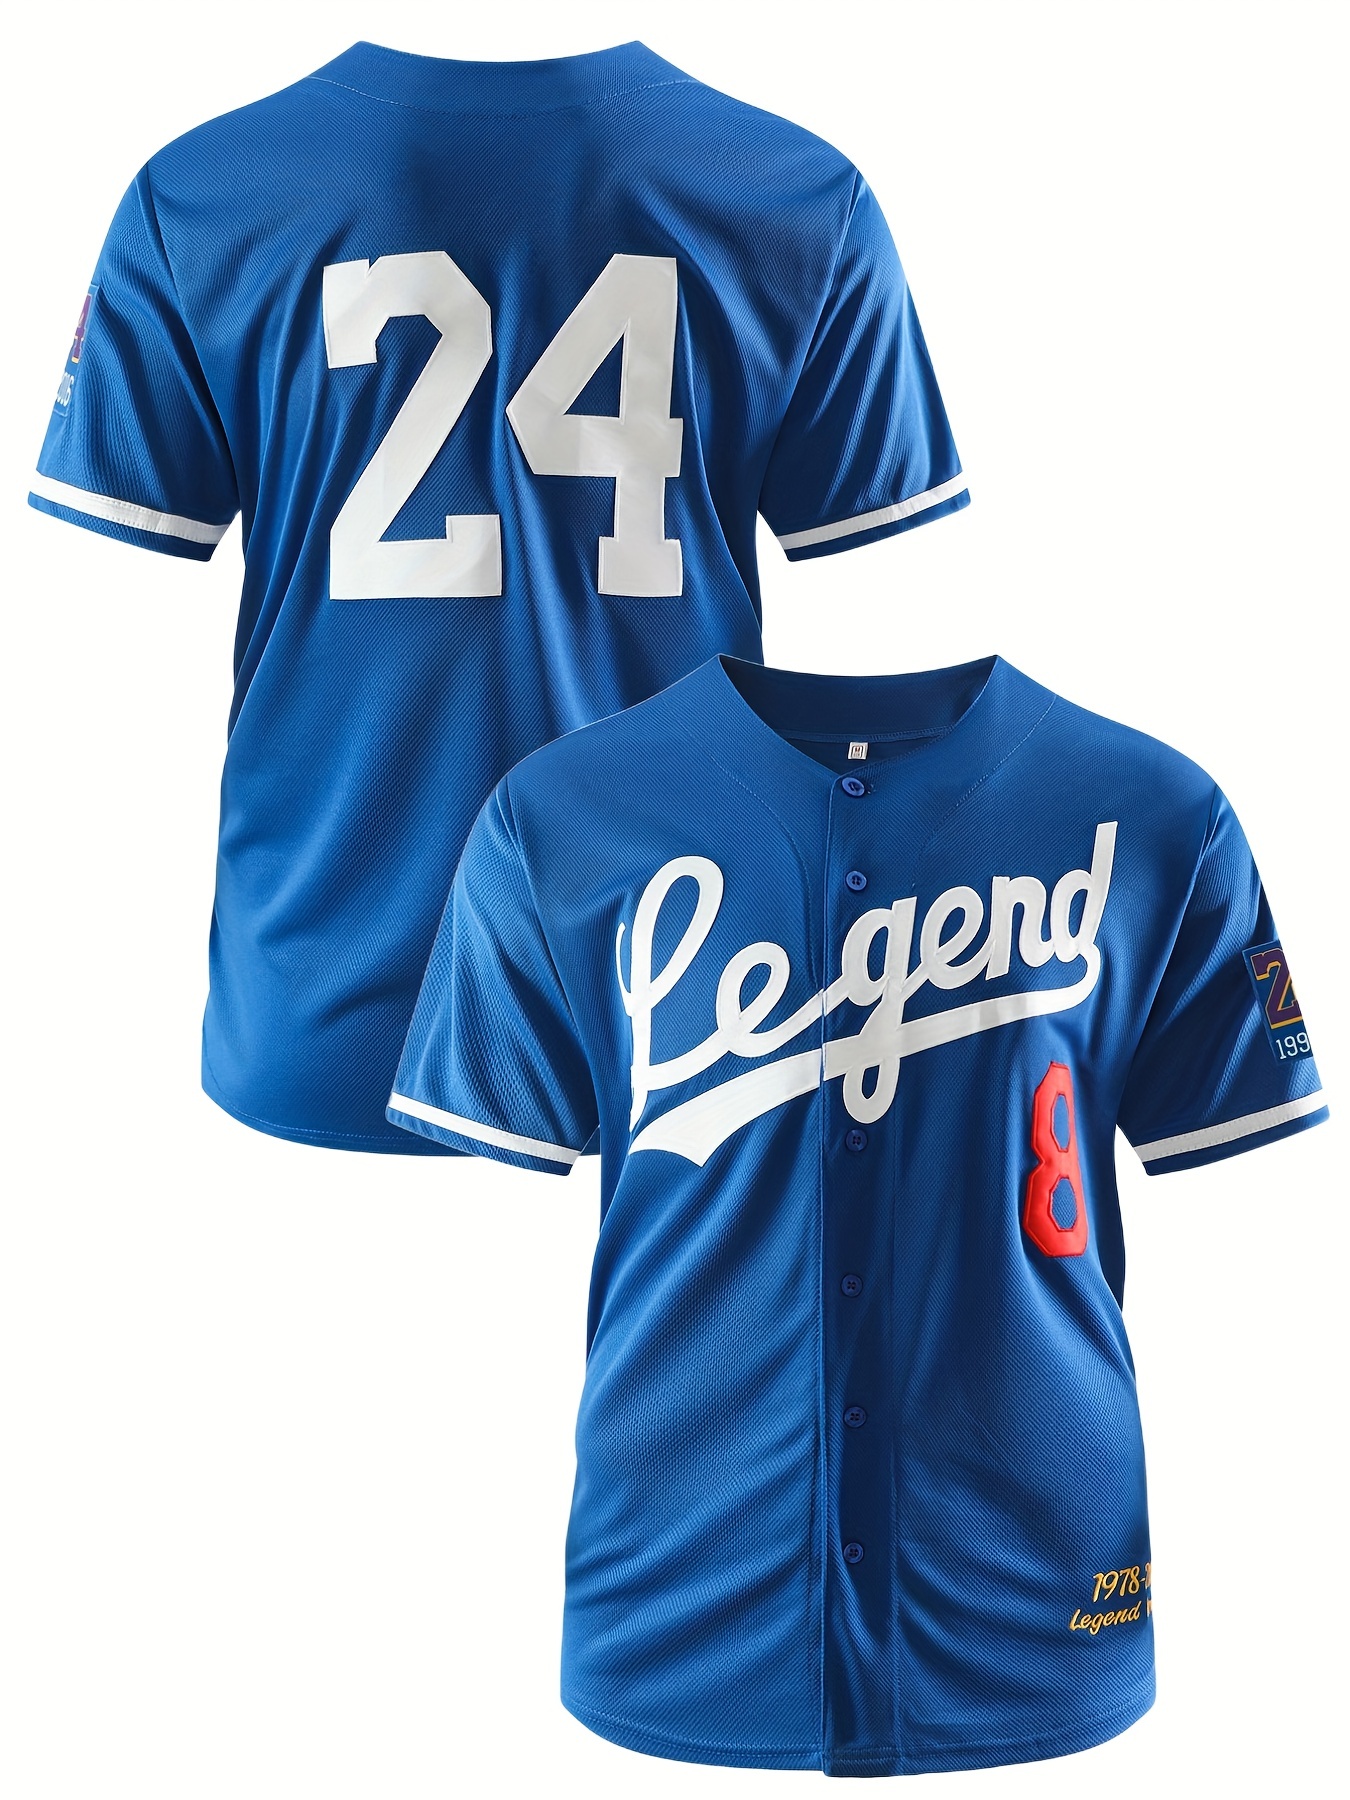 Men's Legend #24 Baseball Jersey, Active Slightly Stretch Breathable Button Up Short Sleeve Uniform Baseball Shirt for Training Competition,Temu